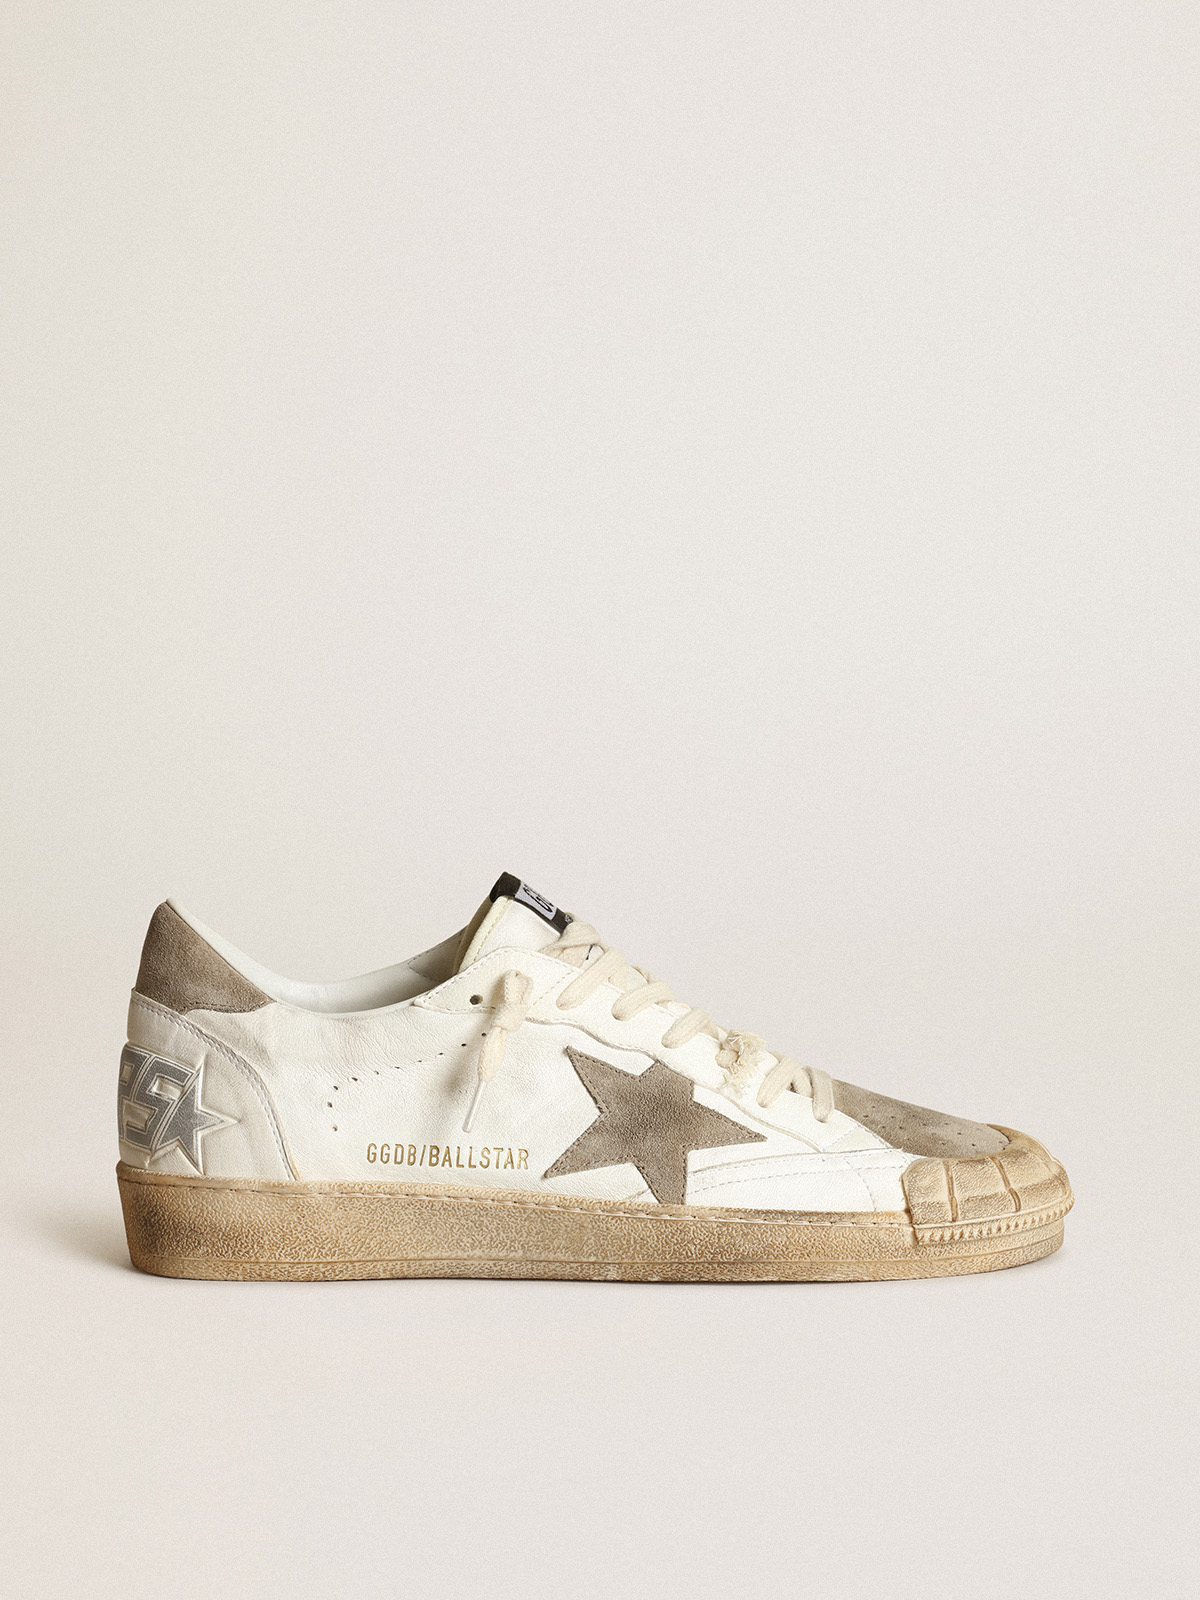 Men\'s Ball Star LTD sneakers in white nappa leather with dove-gray suede  star and heel tab | Golden Goose